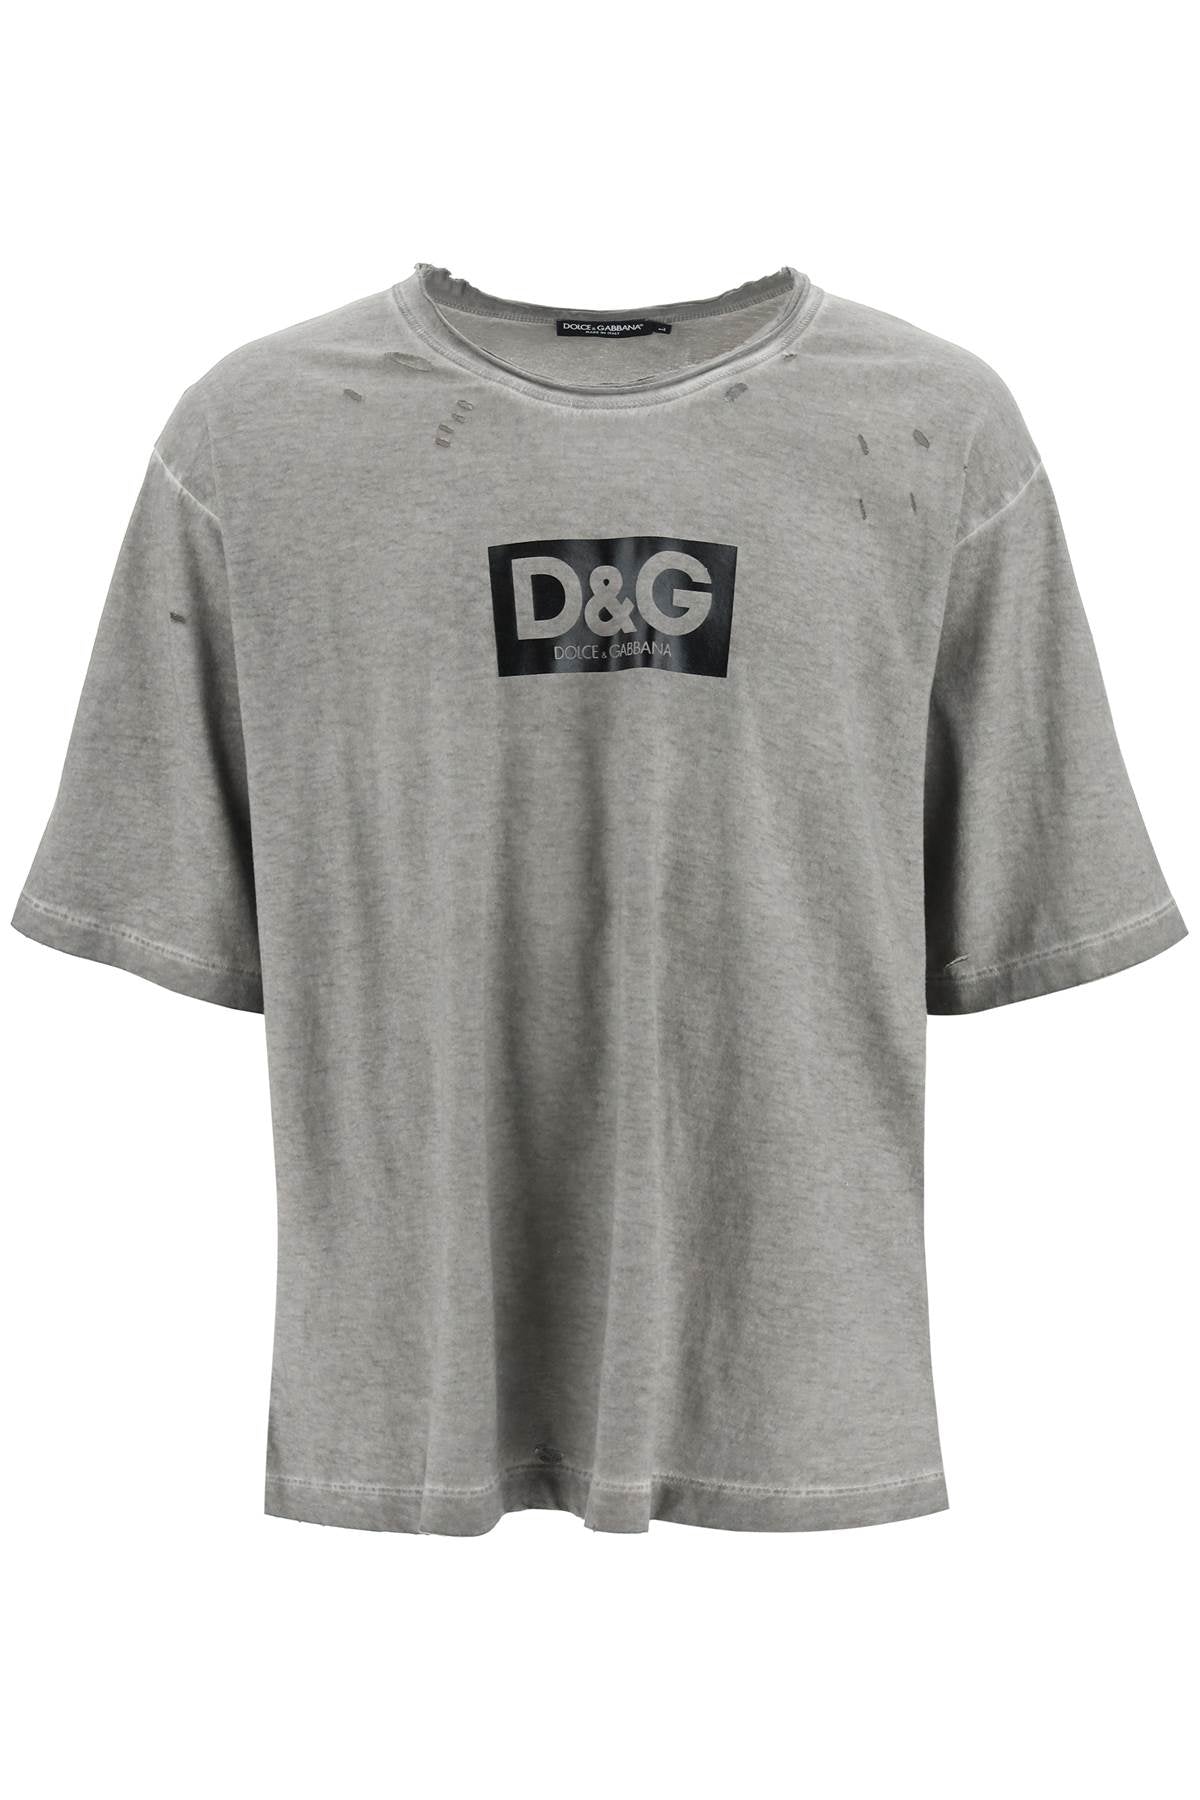 Dolce & Gabbana Washed Cotton T-Shirt With Destroyed Detailing Men